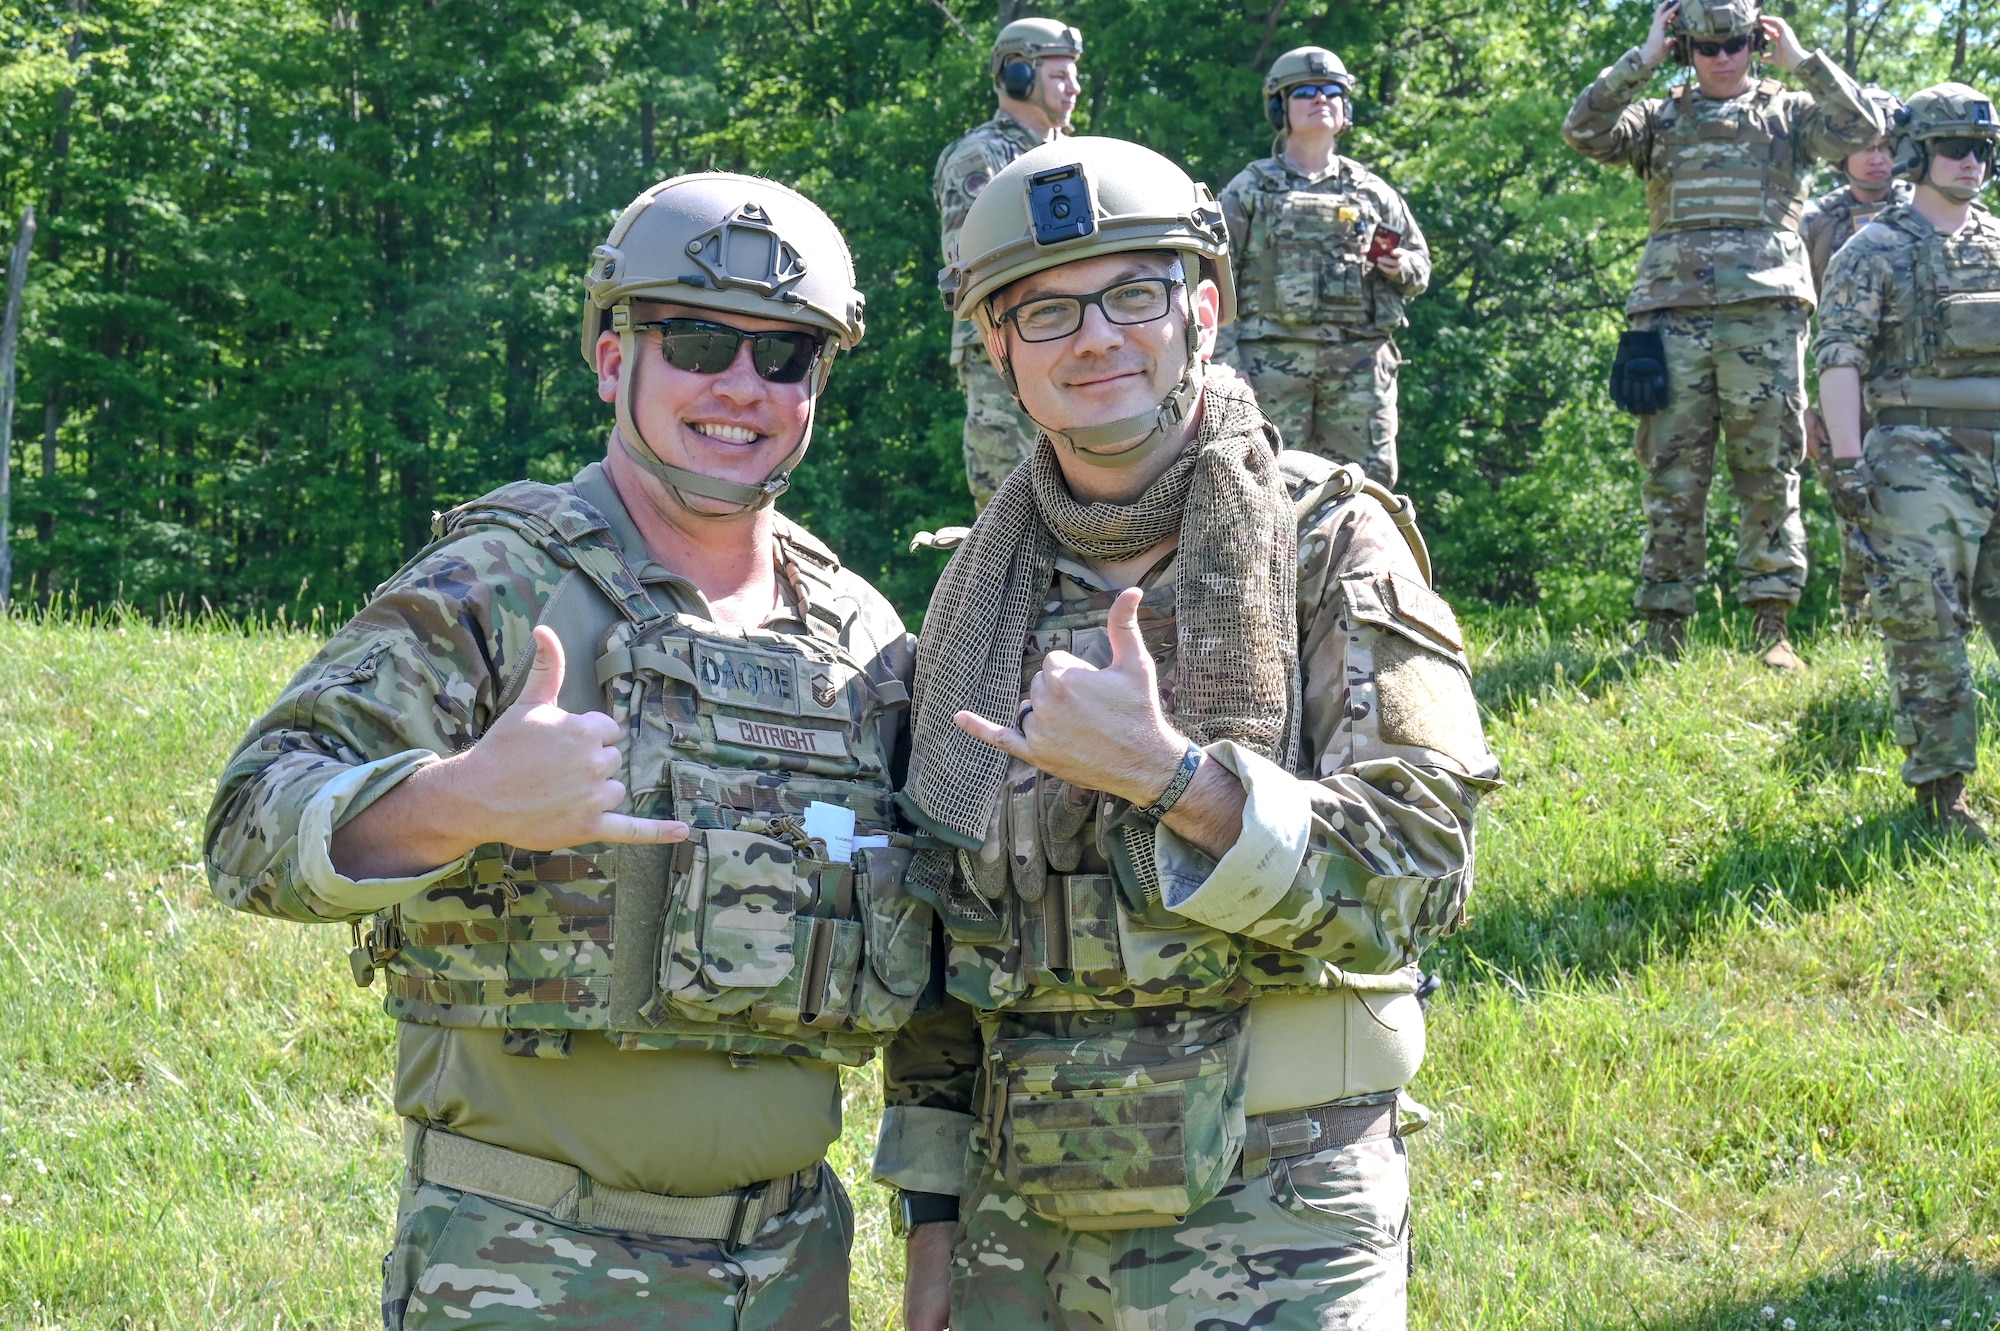 Master Sgt. Adam Cutright, the Integrated Defense Leadership Course assistant course chief assigned to the 919th Security Forces Squadron, Hurlburt Field, Florida, and Senior Master Sgt. Jason Knepper, Air Force Reserve Command Security Forces training manager, pose for a picture on June 1, 2023, at Camp James A. Garfield Joint Military Training Center, Ohio.